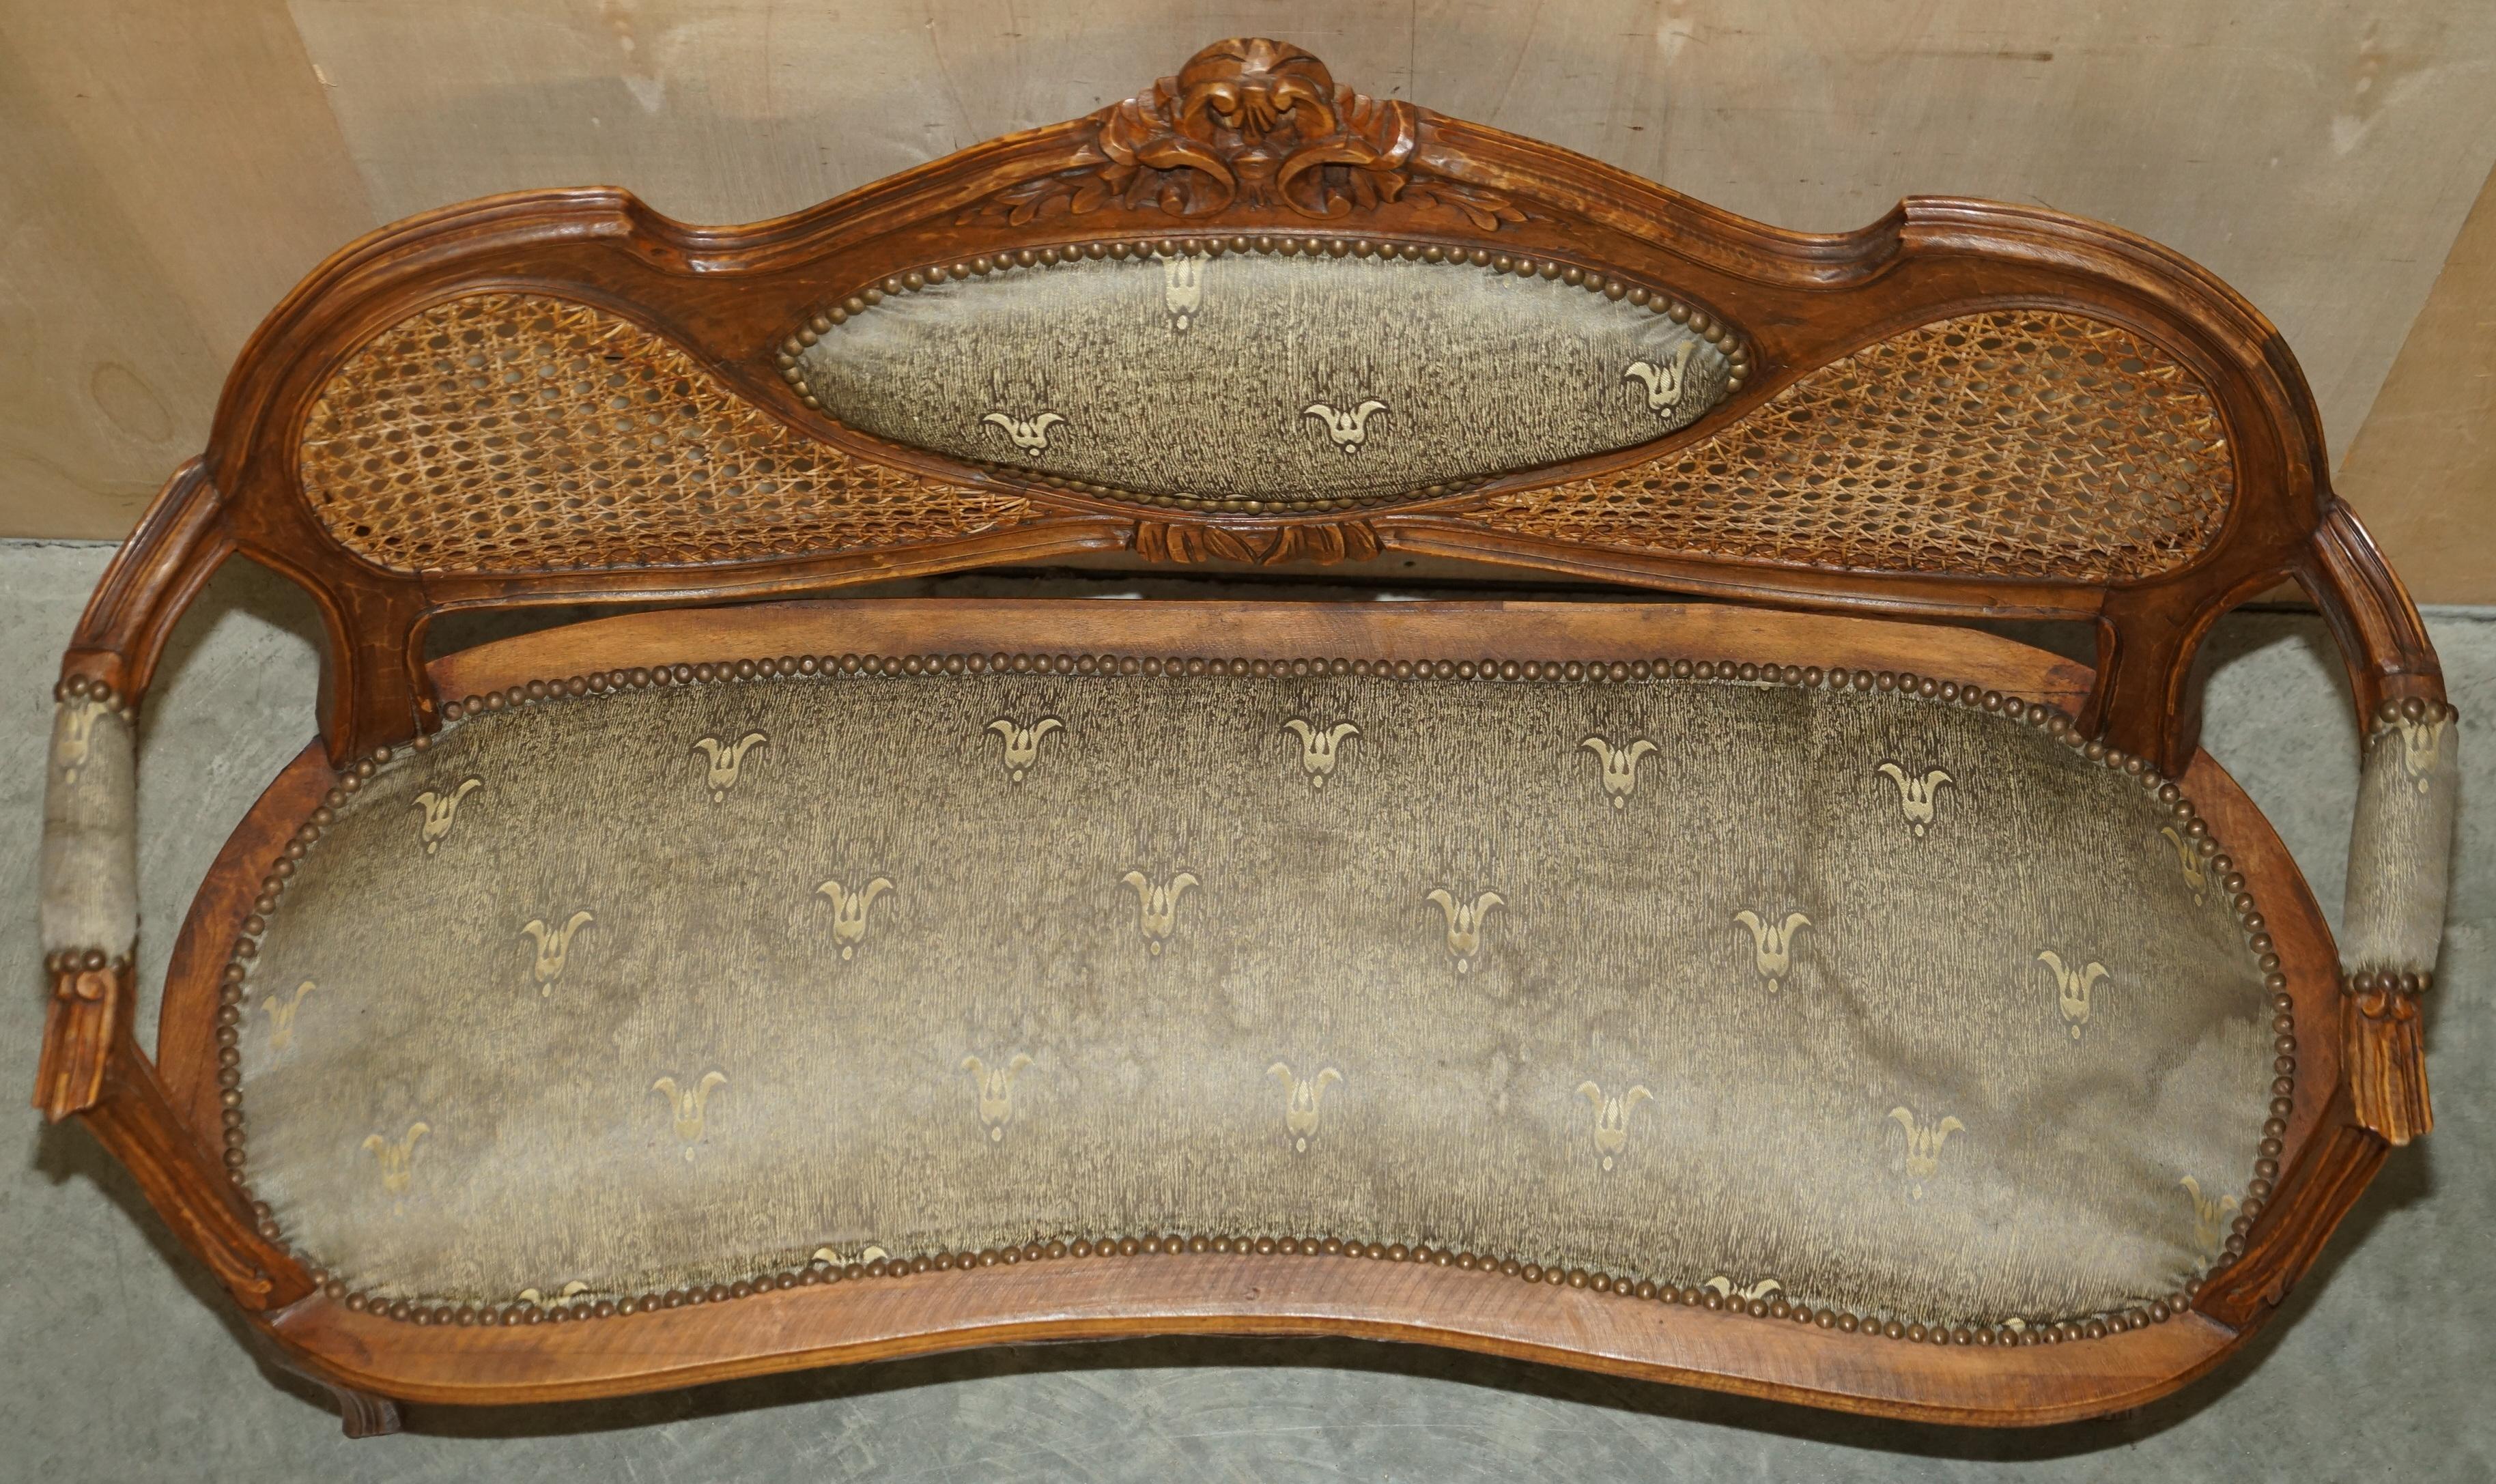 LOVELY ANTIQUE NAPOLEON III CIRCA 1890 BERGERE WiNDOW SEAT BENCH SETTEE SOFA For Sale 5